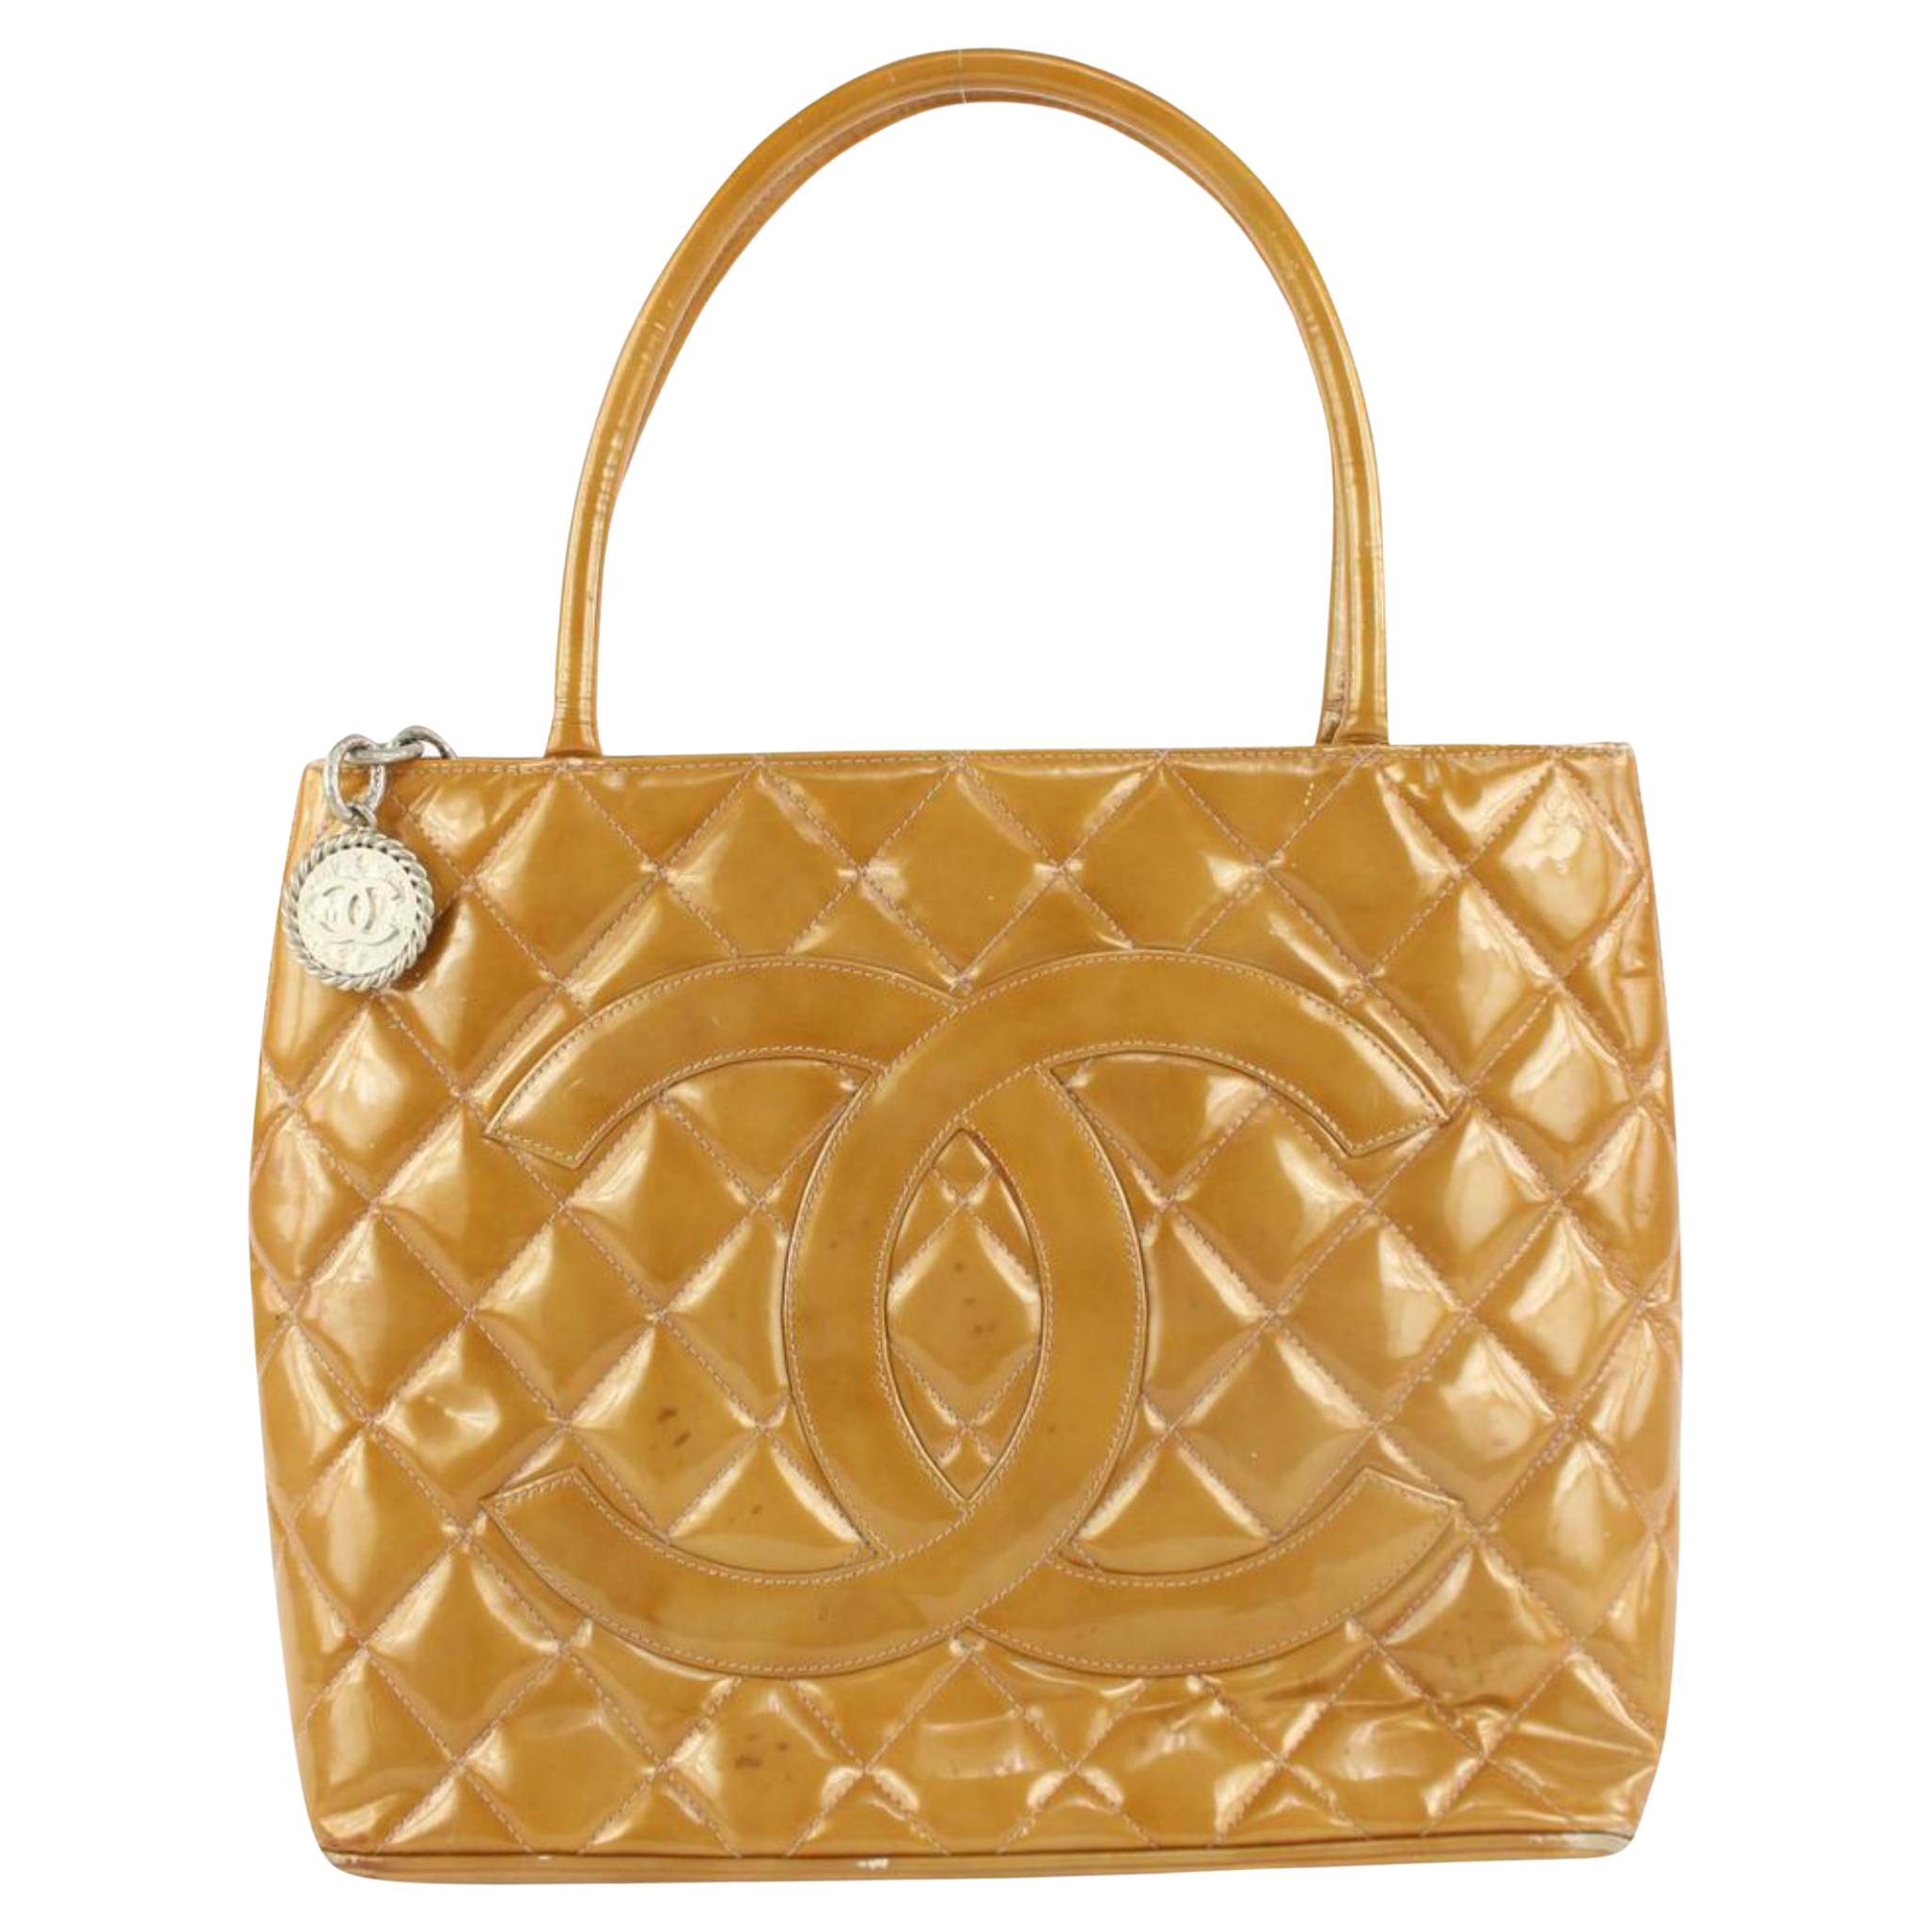 Chanel Quilted Patent Medallion Tote Bag